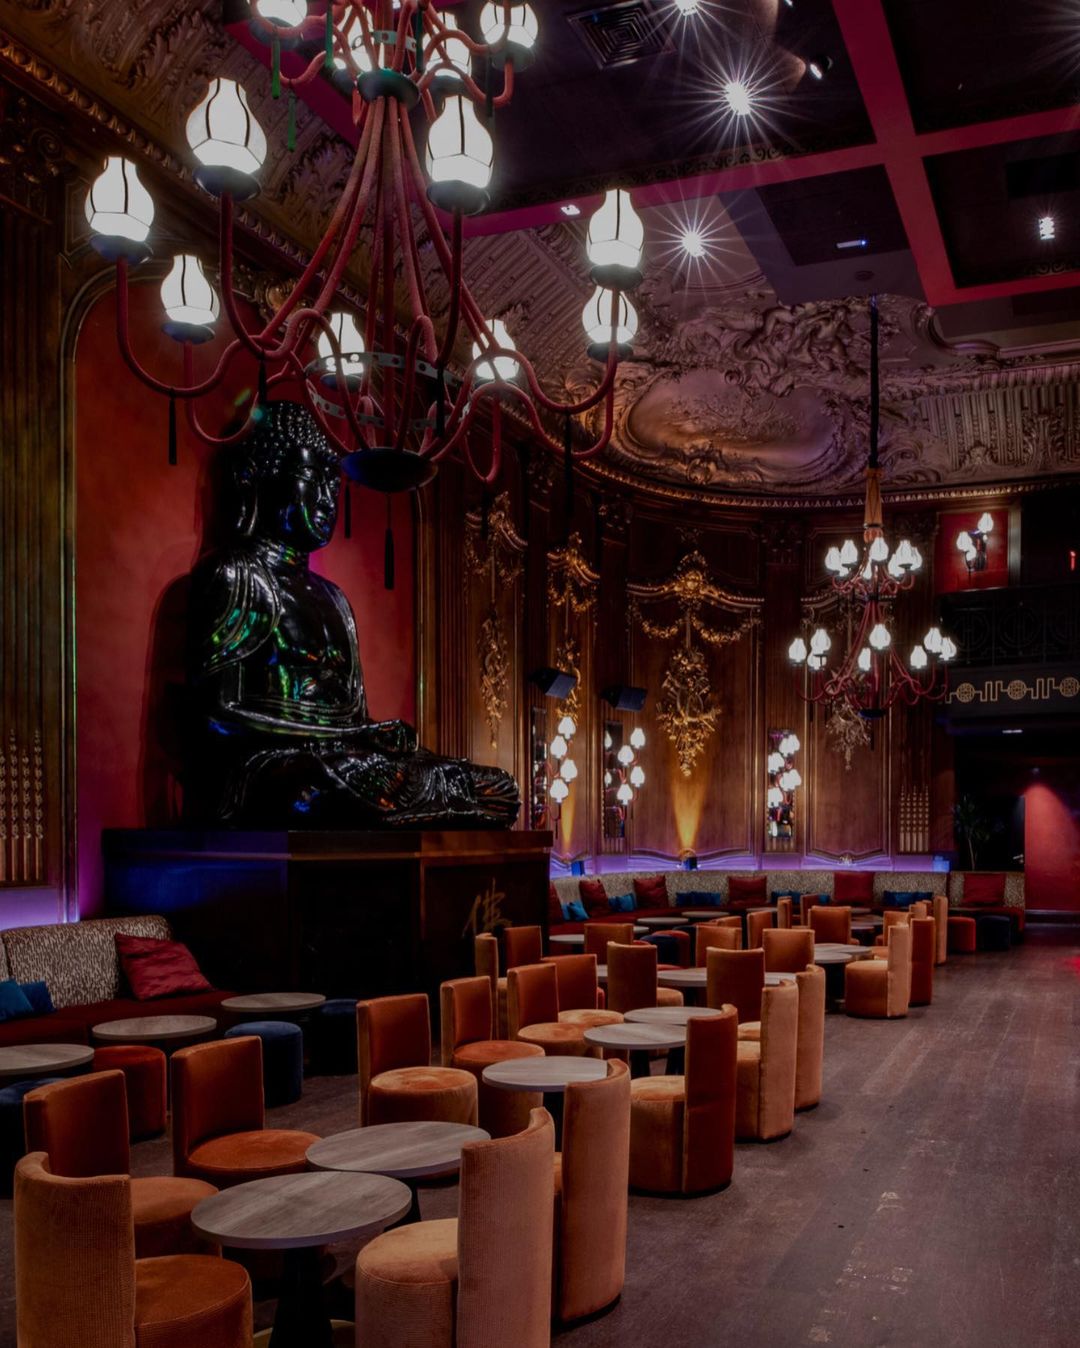 The unique setting with giant Buddha and cabaret theater atmosphere at Buddha-Bar Monte-Carlo